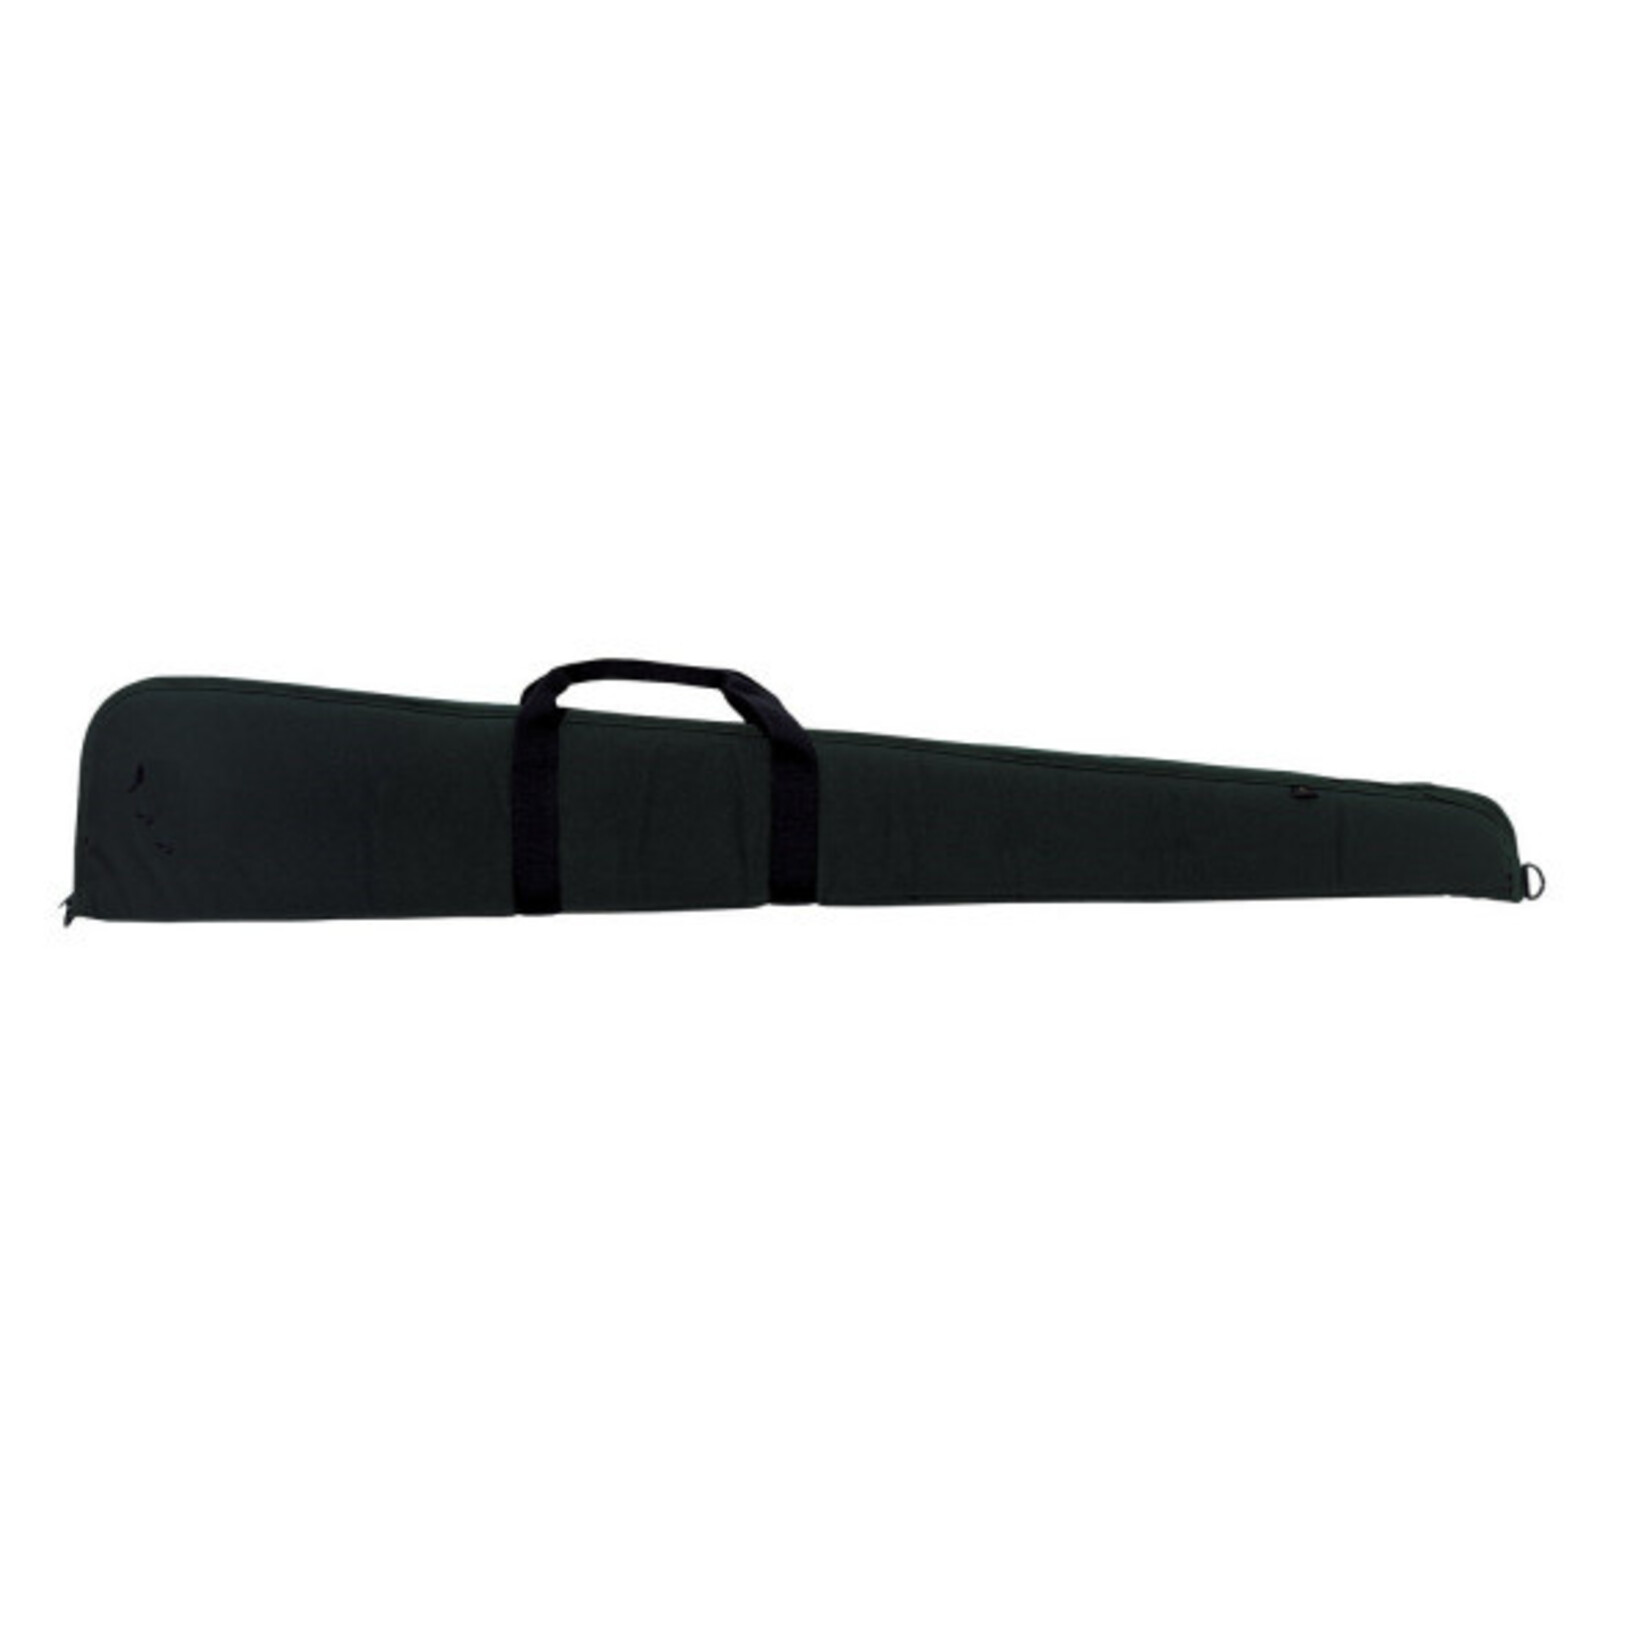 HQ OUTFITTERS Étui Hq Outfitters Souple 52" Noir